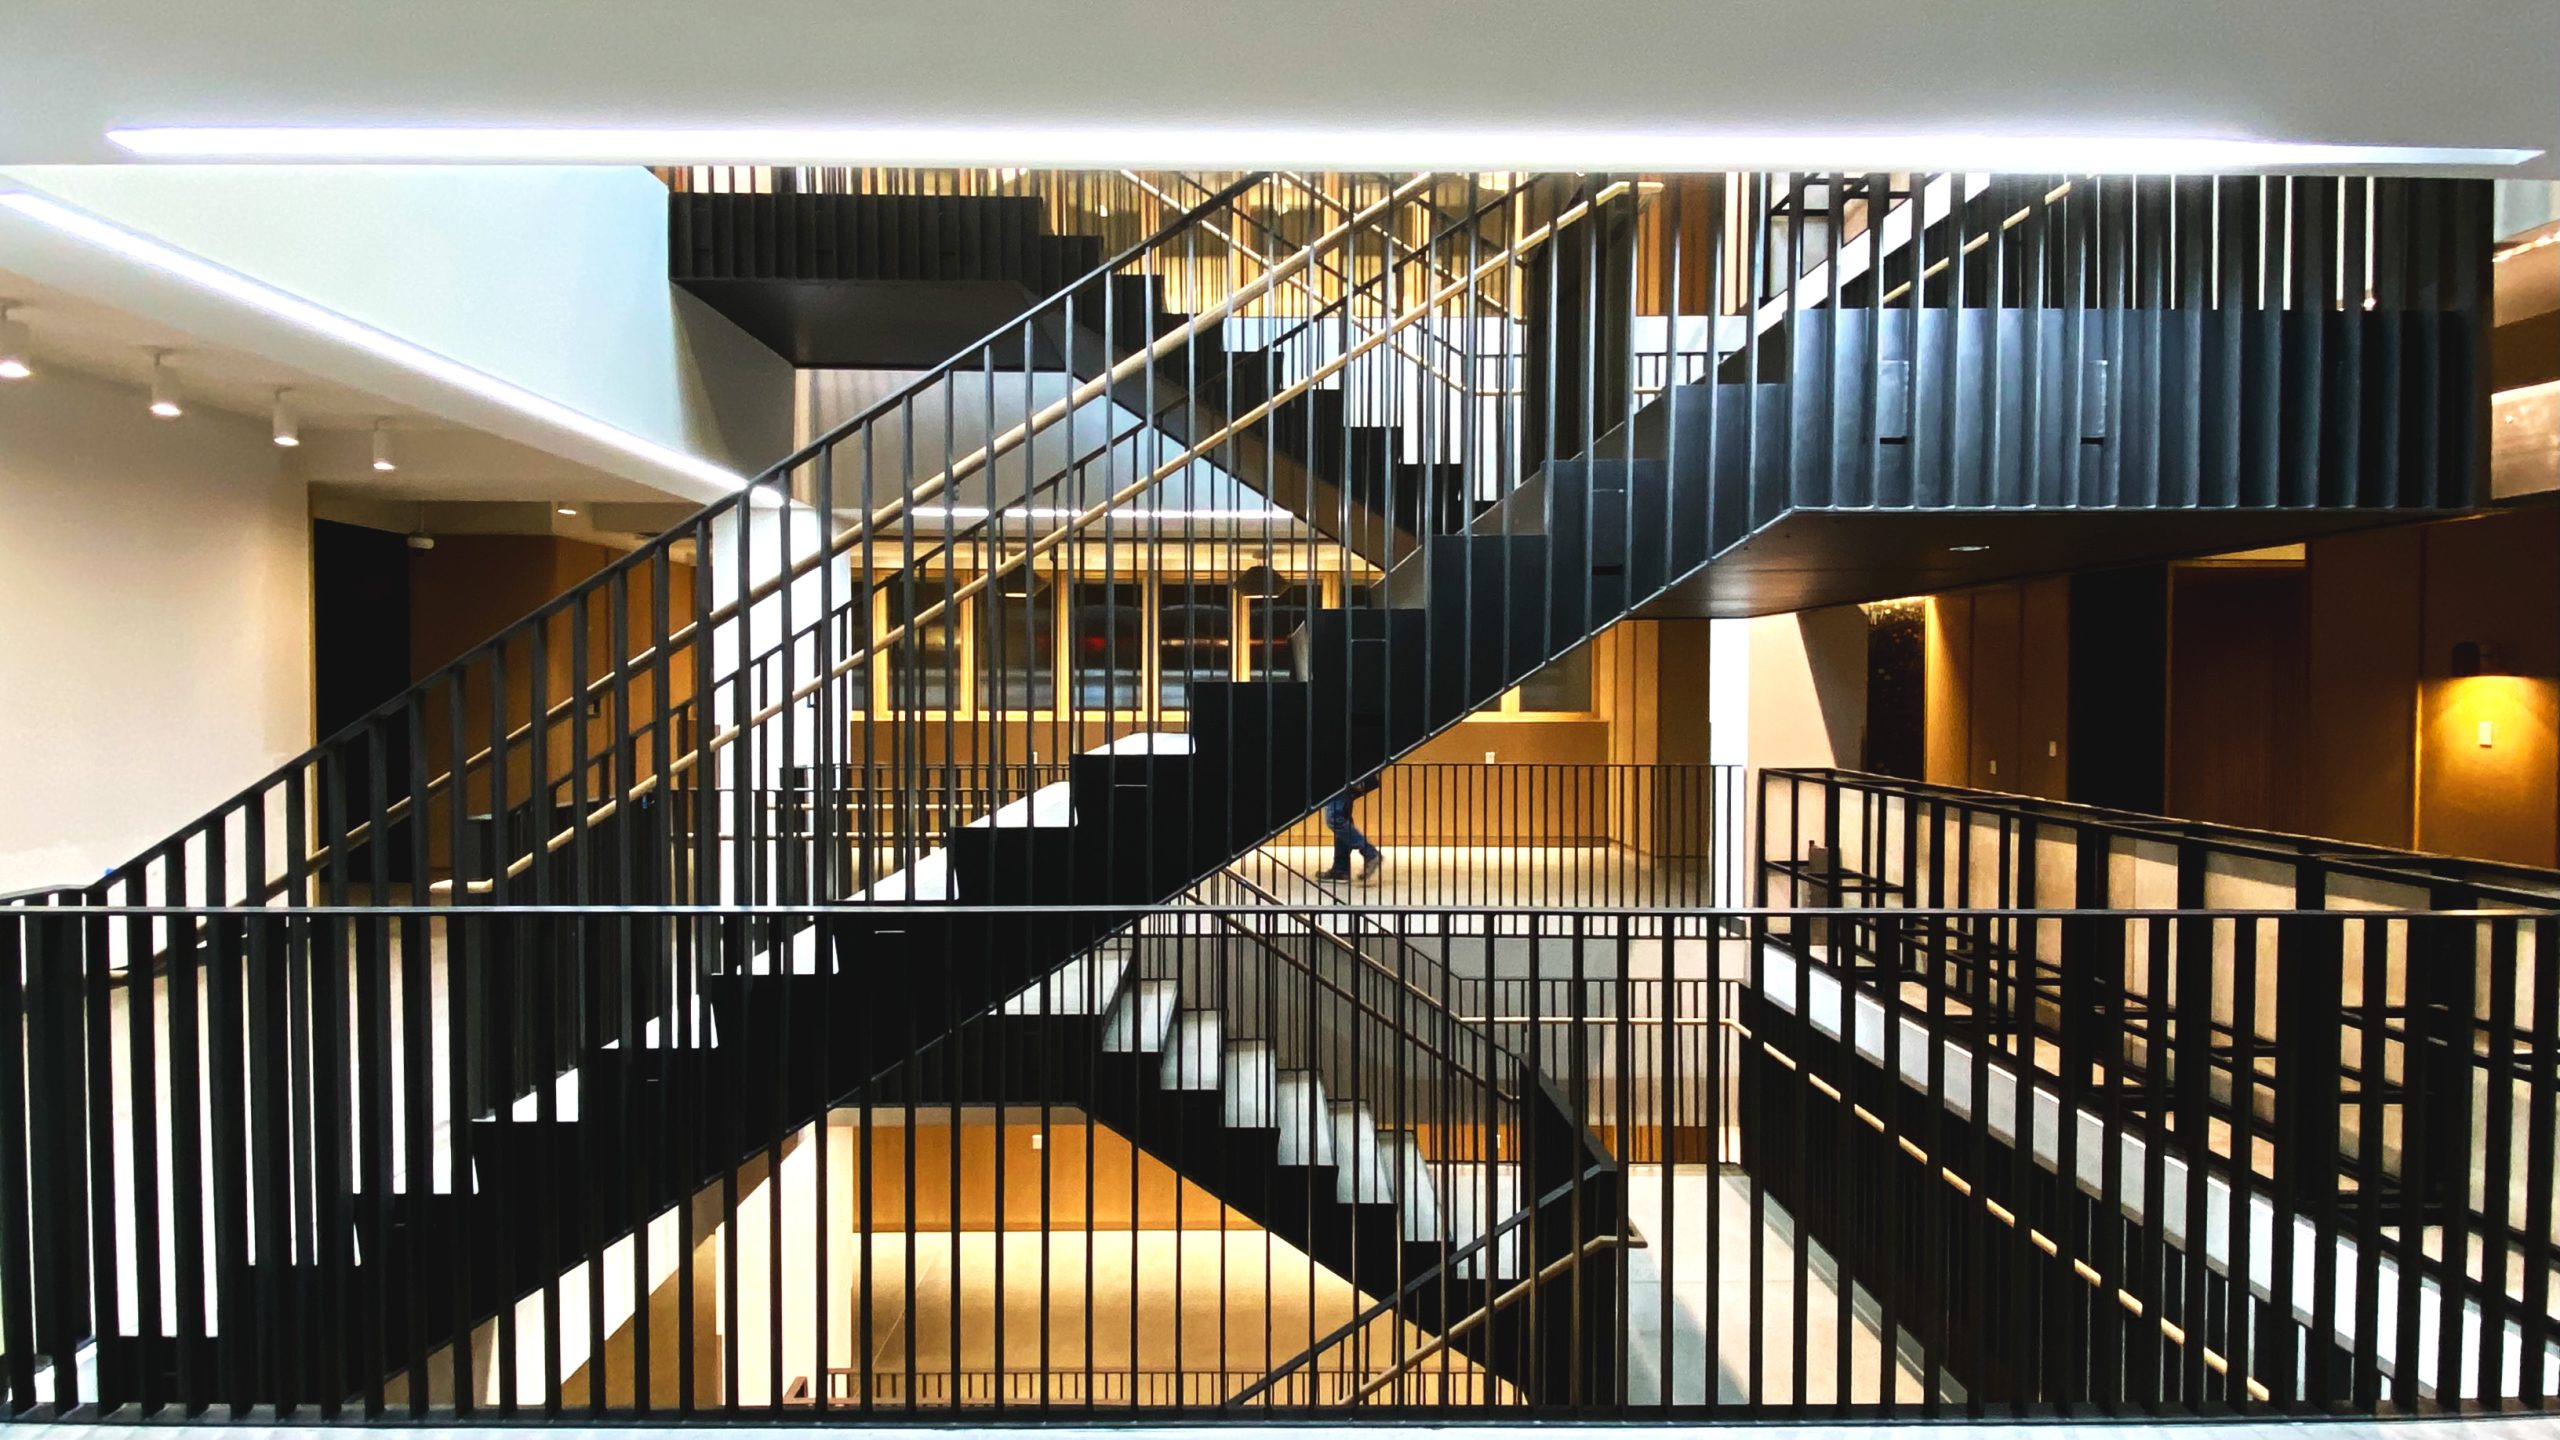 Black steel staircase with wood handrails inside building atrium